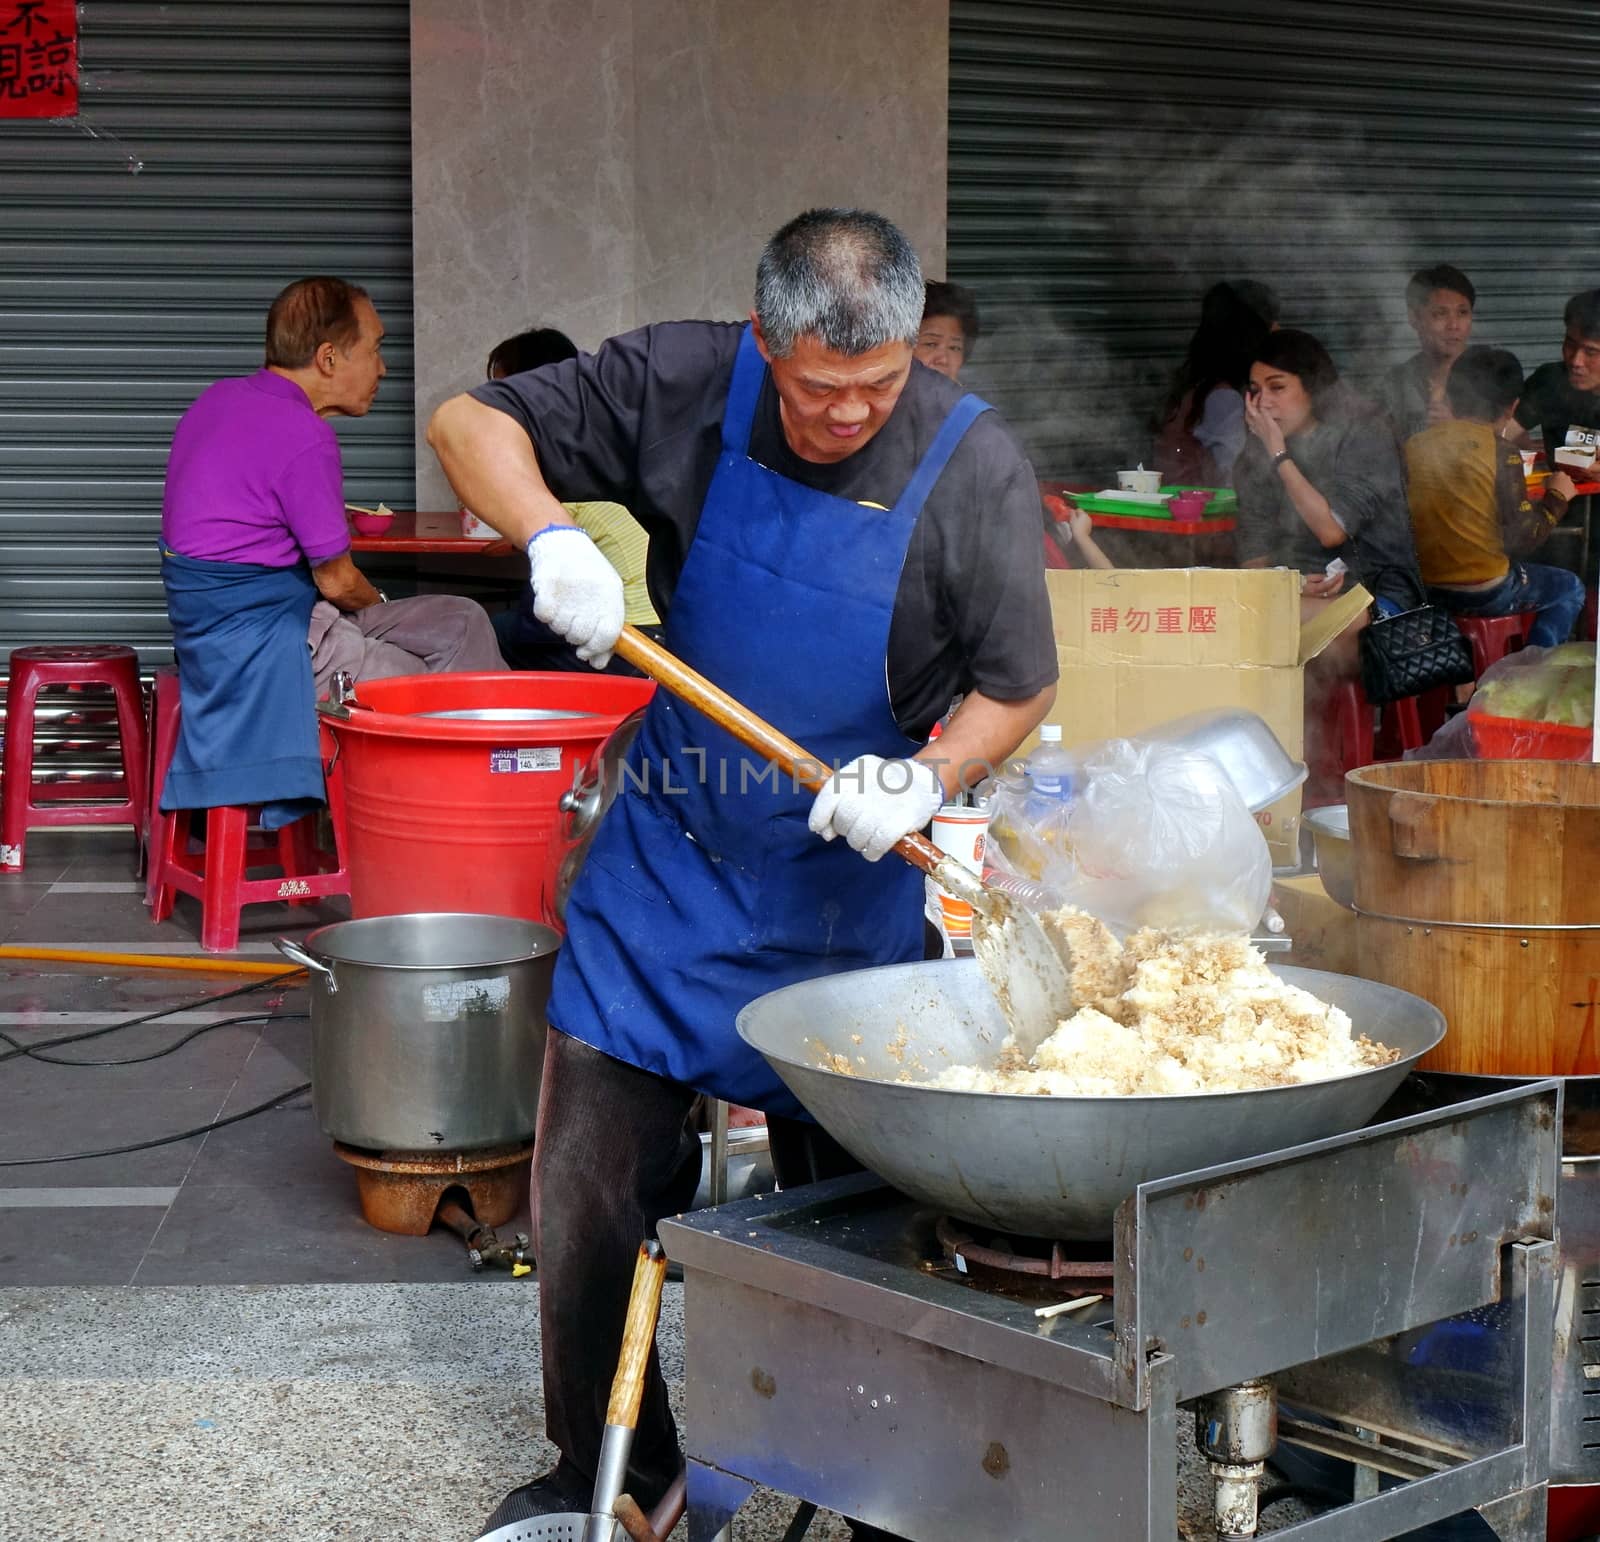 KAOHSIUNG, TAIWAN -- FEBRUARY 17, 2018: A man at an outdoor food stall cooks fried rice in a large wok.
